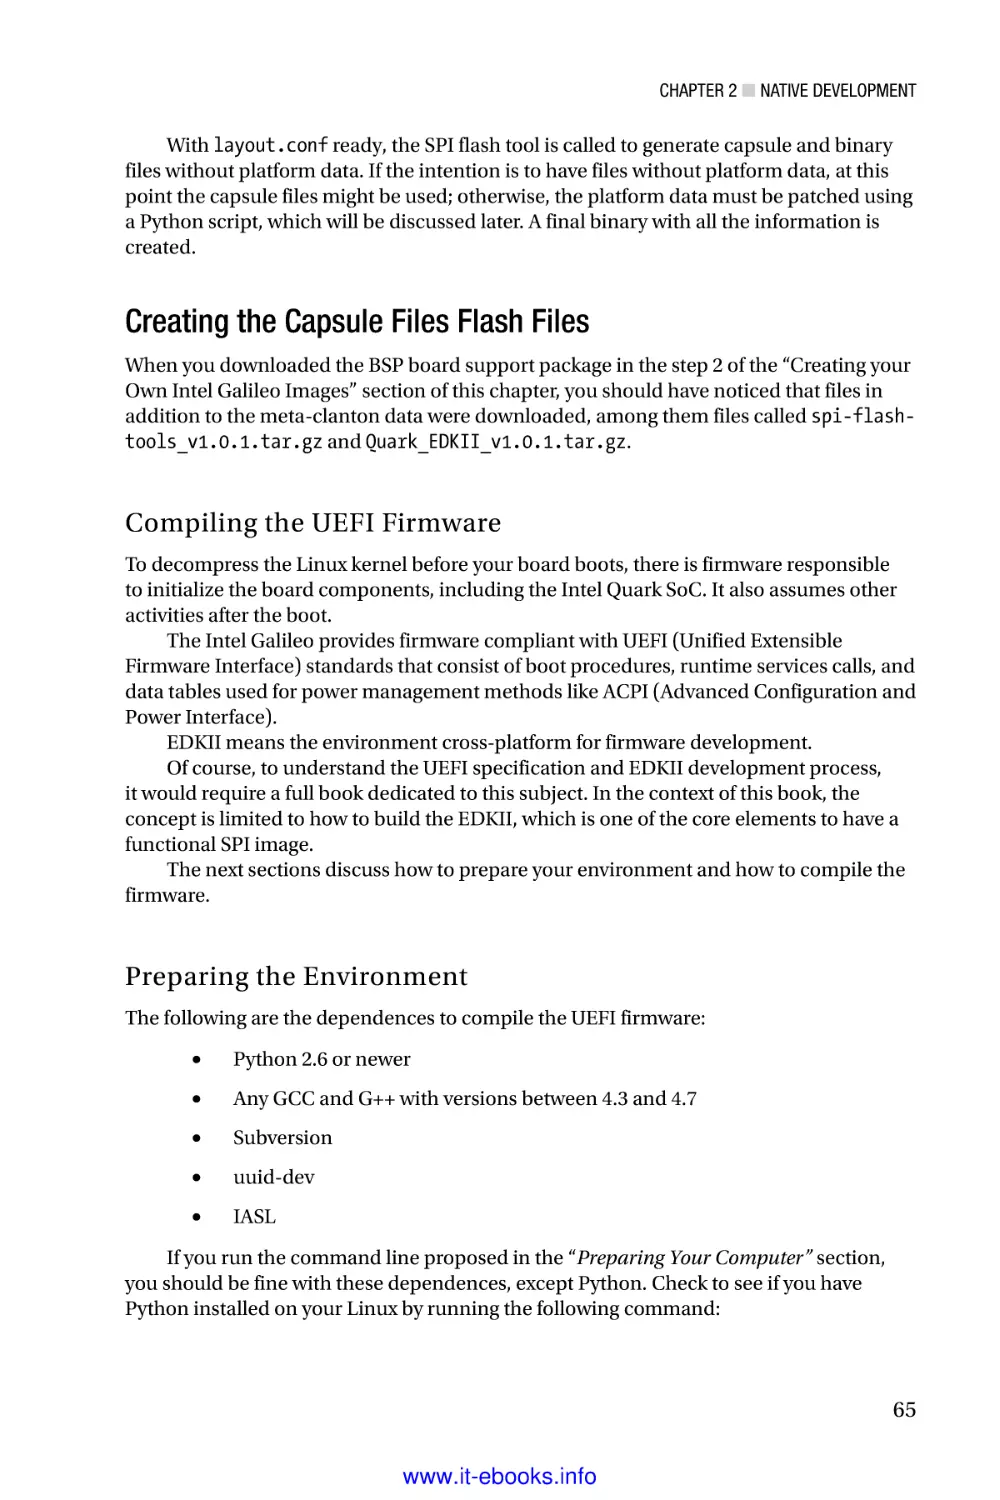 Creating the Capsule Files Flash Files
Compiling the UEFI Firmware
Preparing the Environment